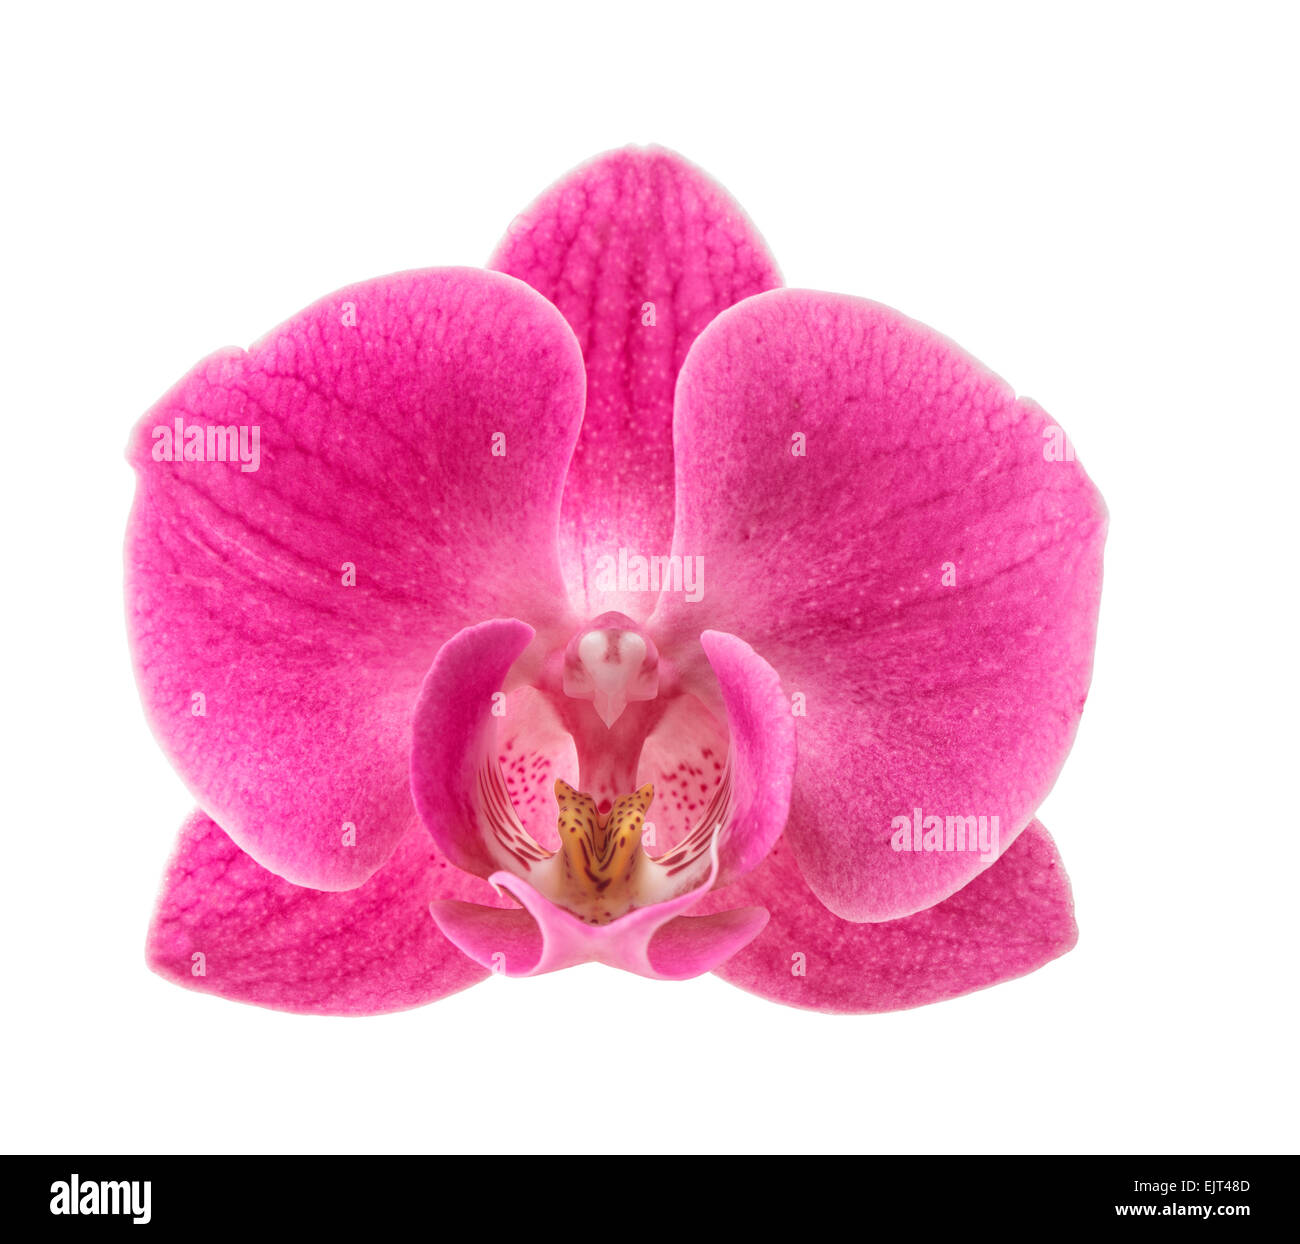 Orchid flower head isolated on white background. Fresh pink blossom Stock Photo